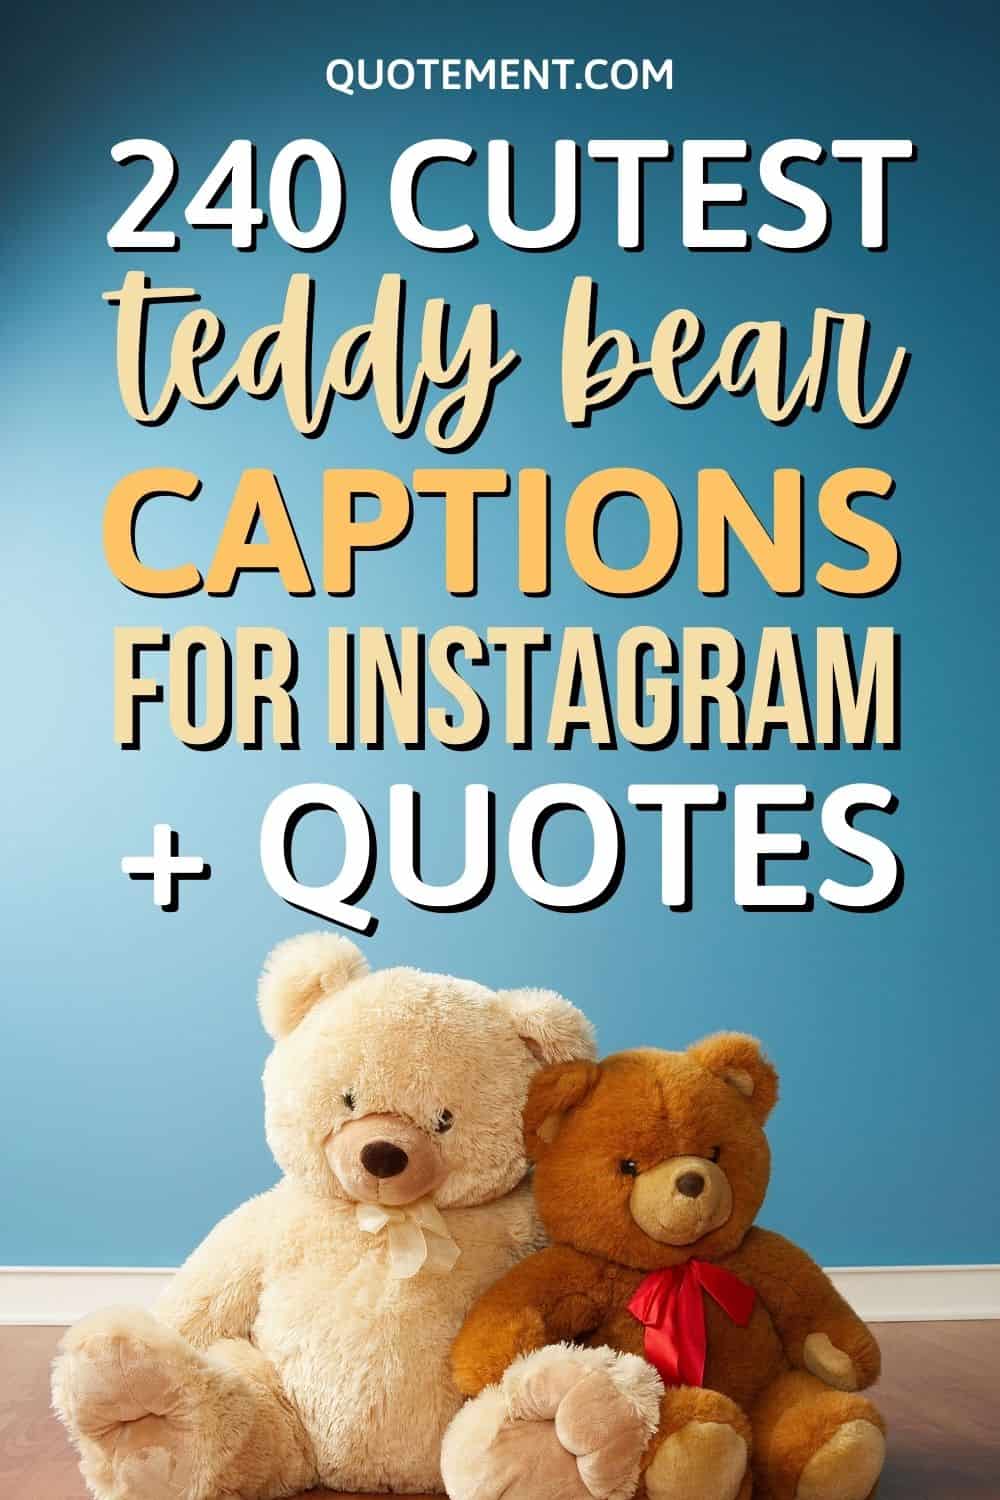 240 Cutest Teddy Bear Captions For Instagram + Quotes